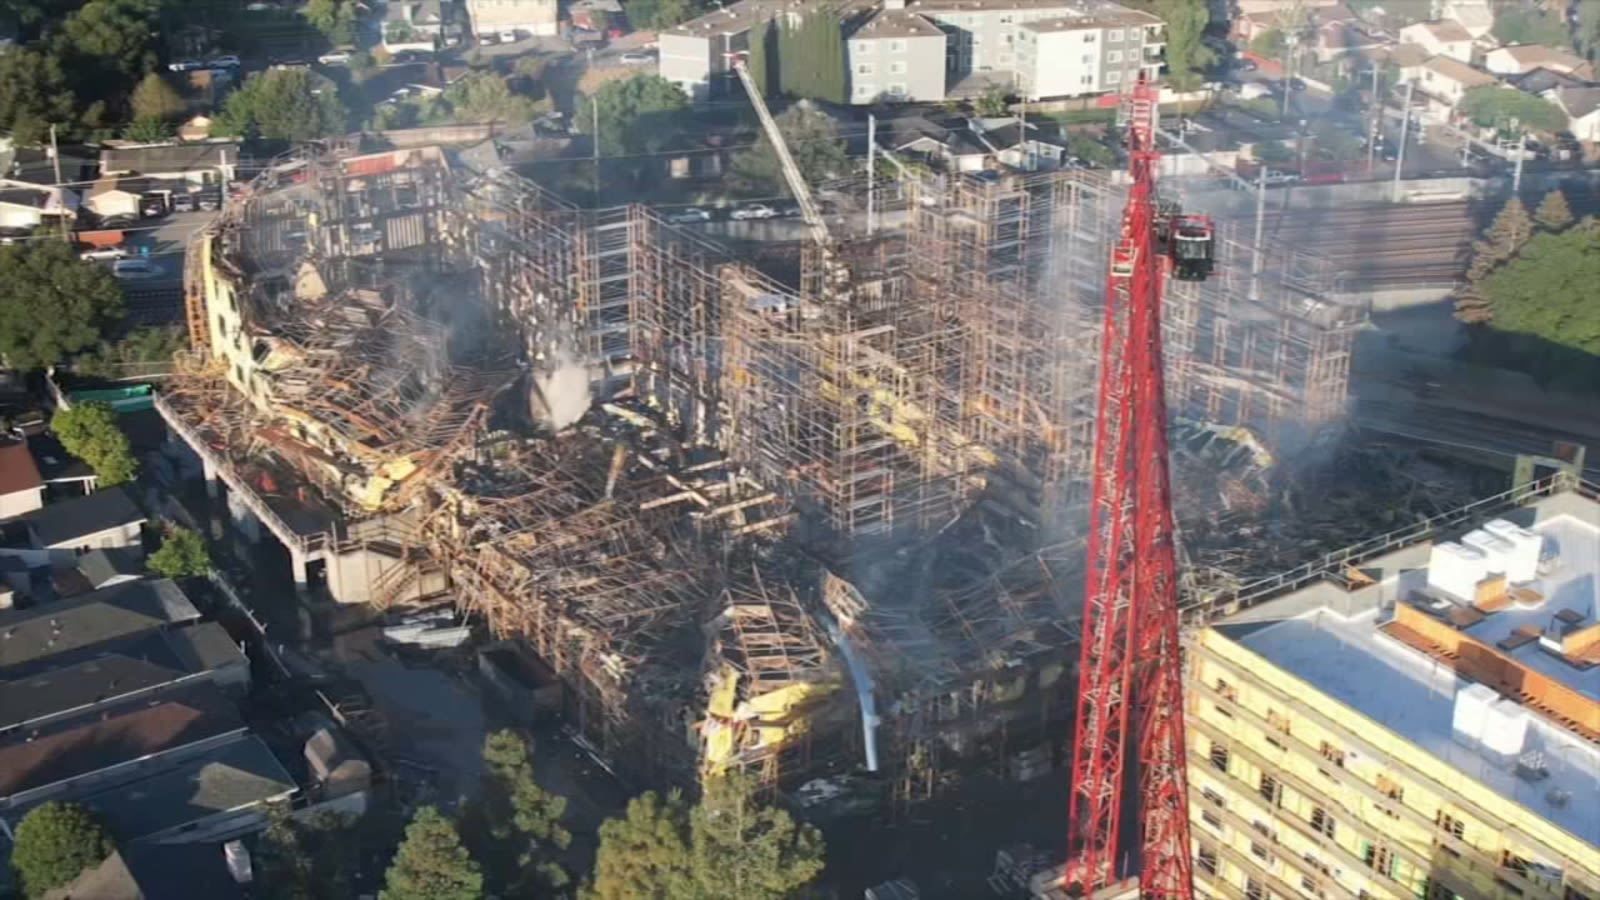 Here's what we know about the $155M Redwood City housing project that burned in massive fire